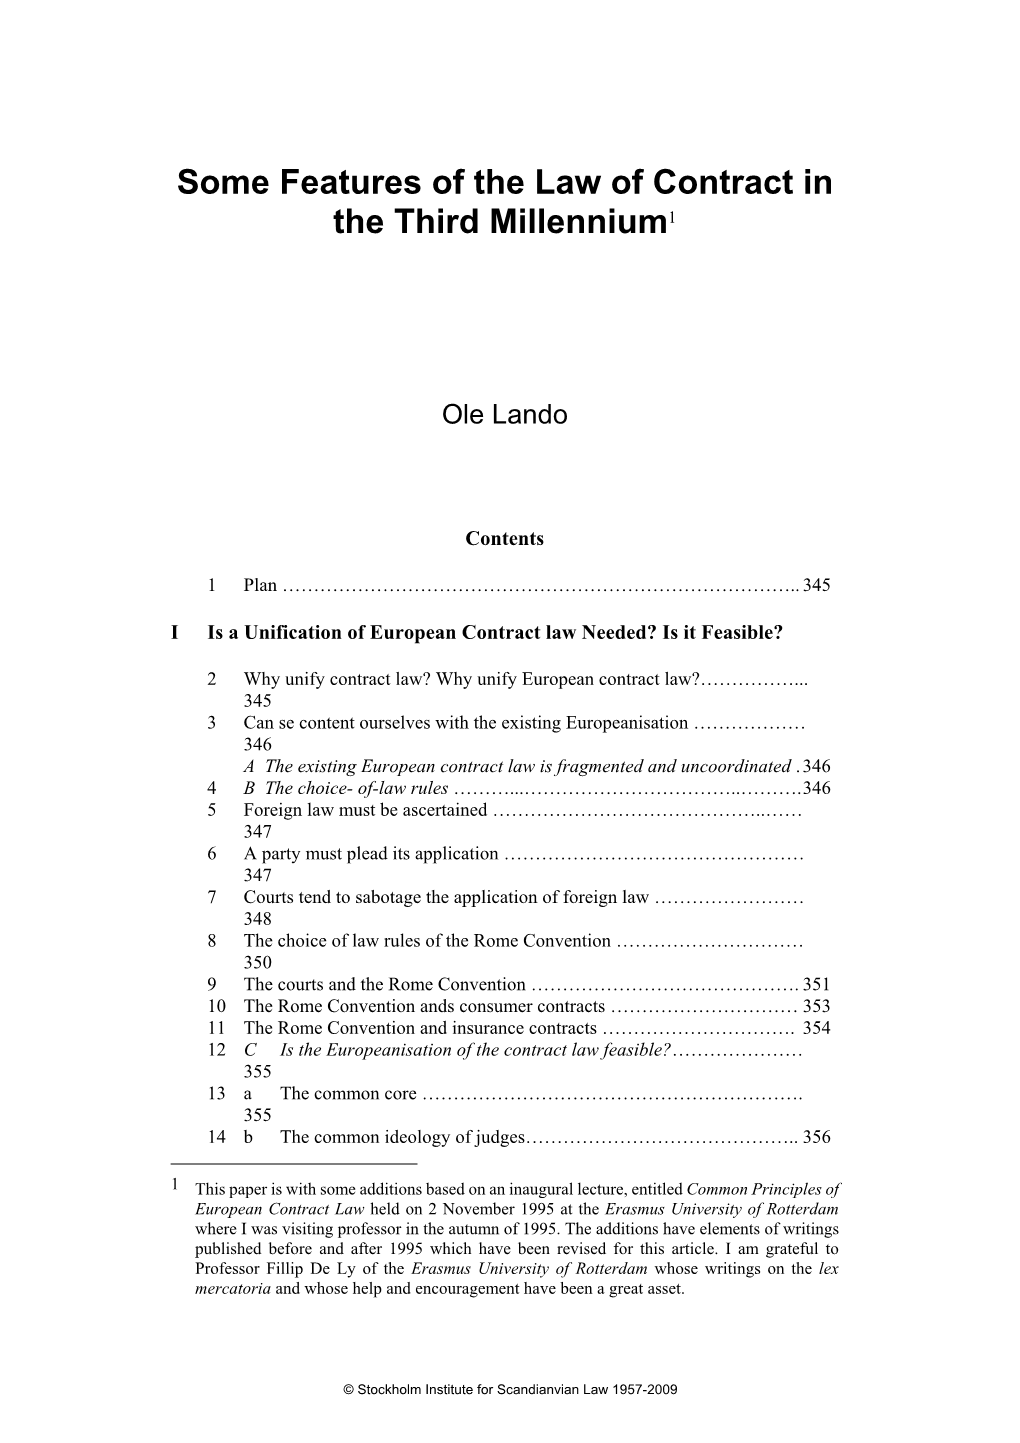 Some Features of the Law of Contract in the Third Millennium1